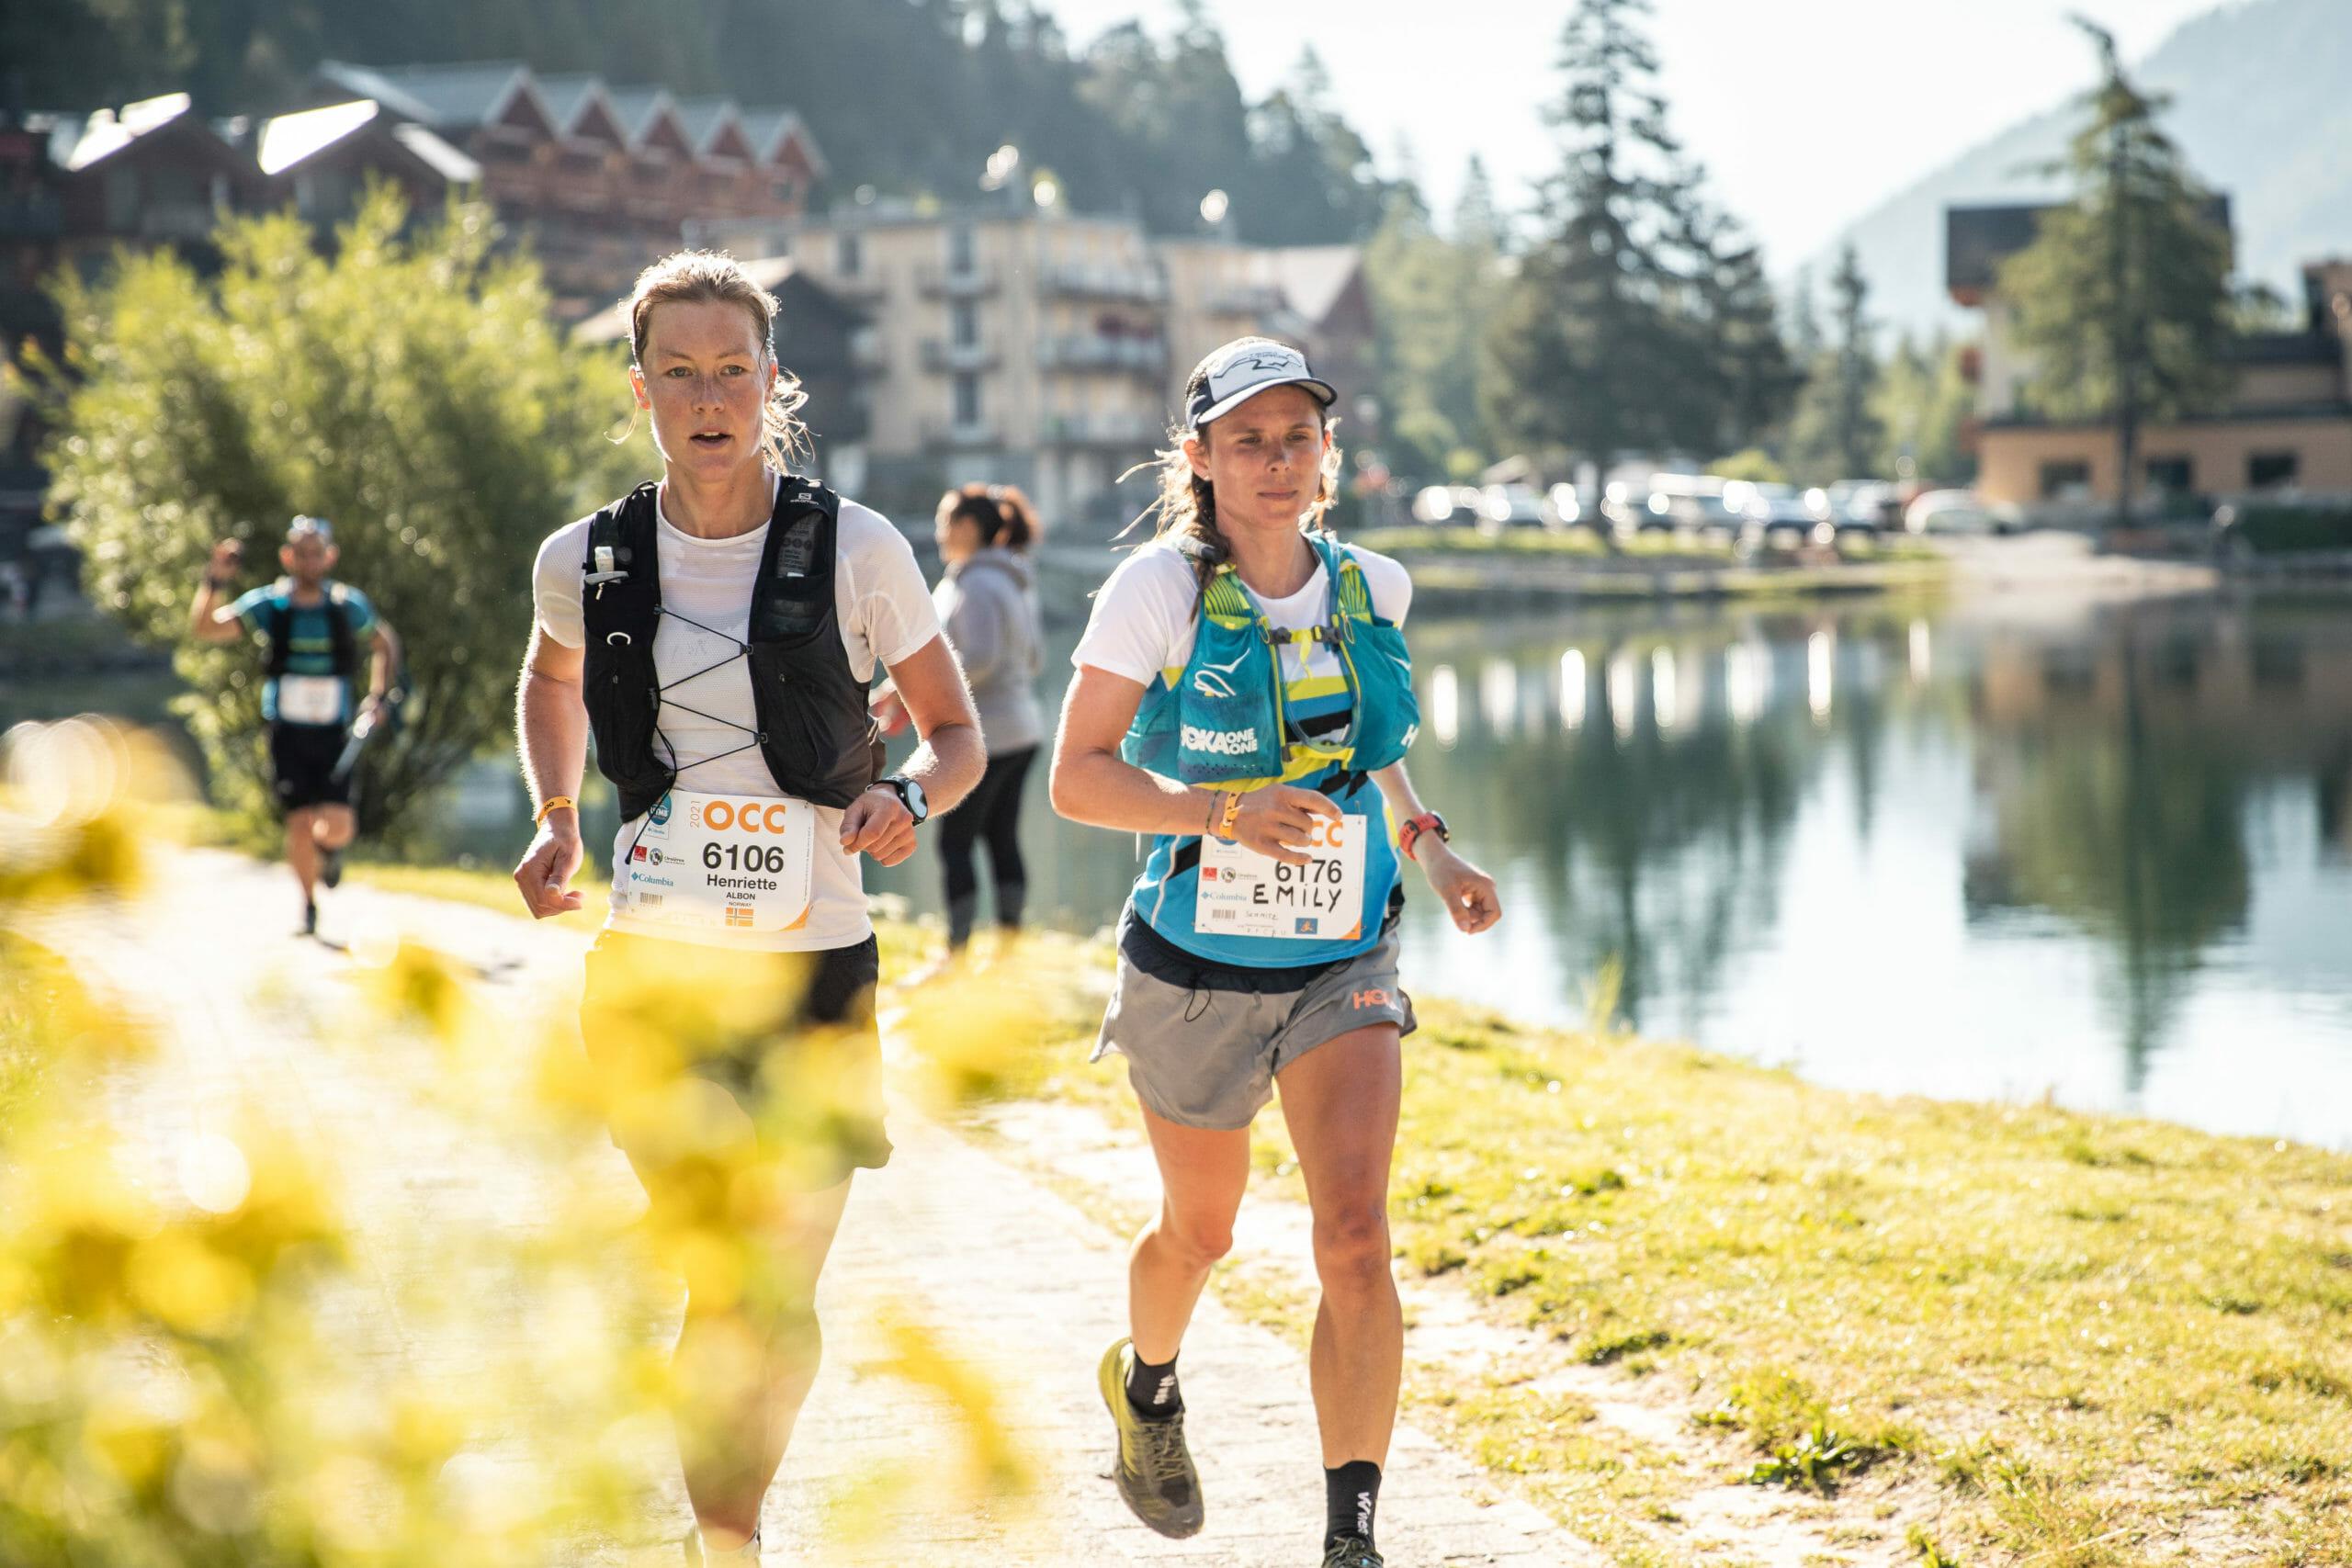 Emily Schmitz and another female trail runner running in the UMTB OCC race